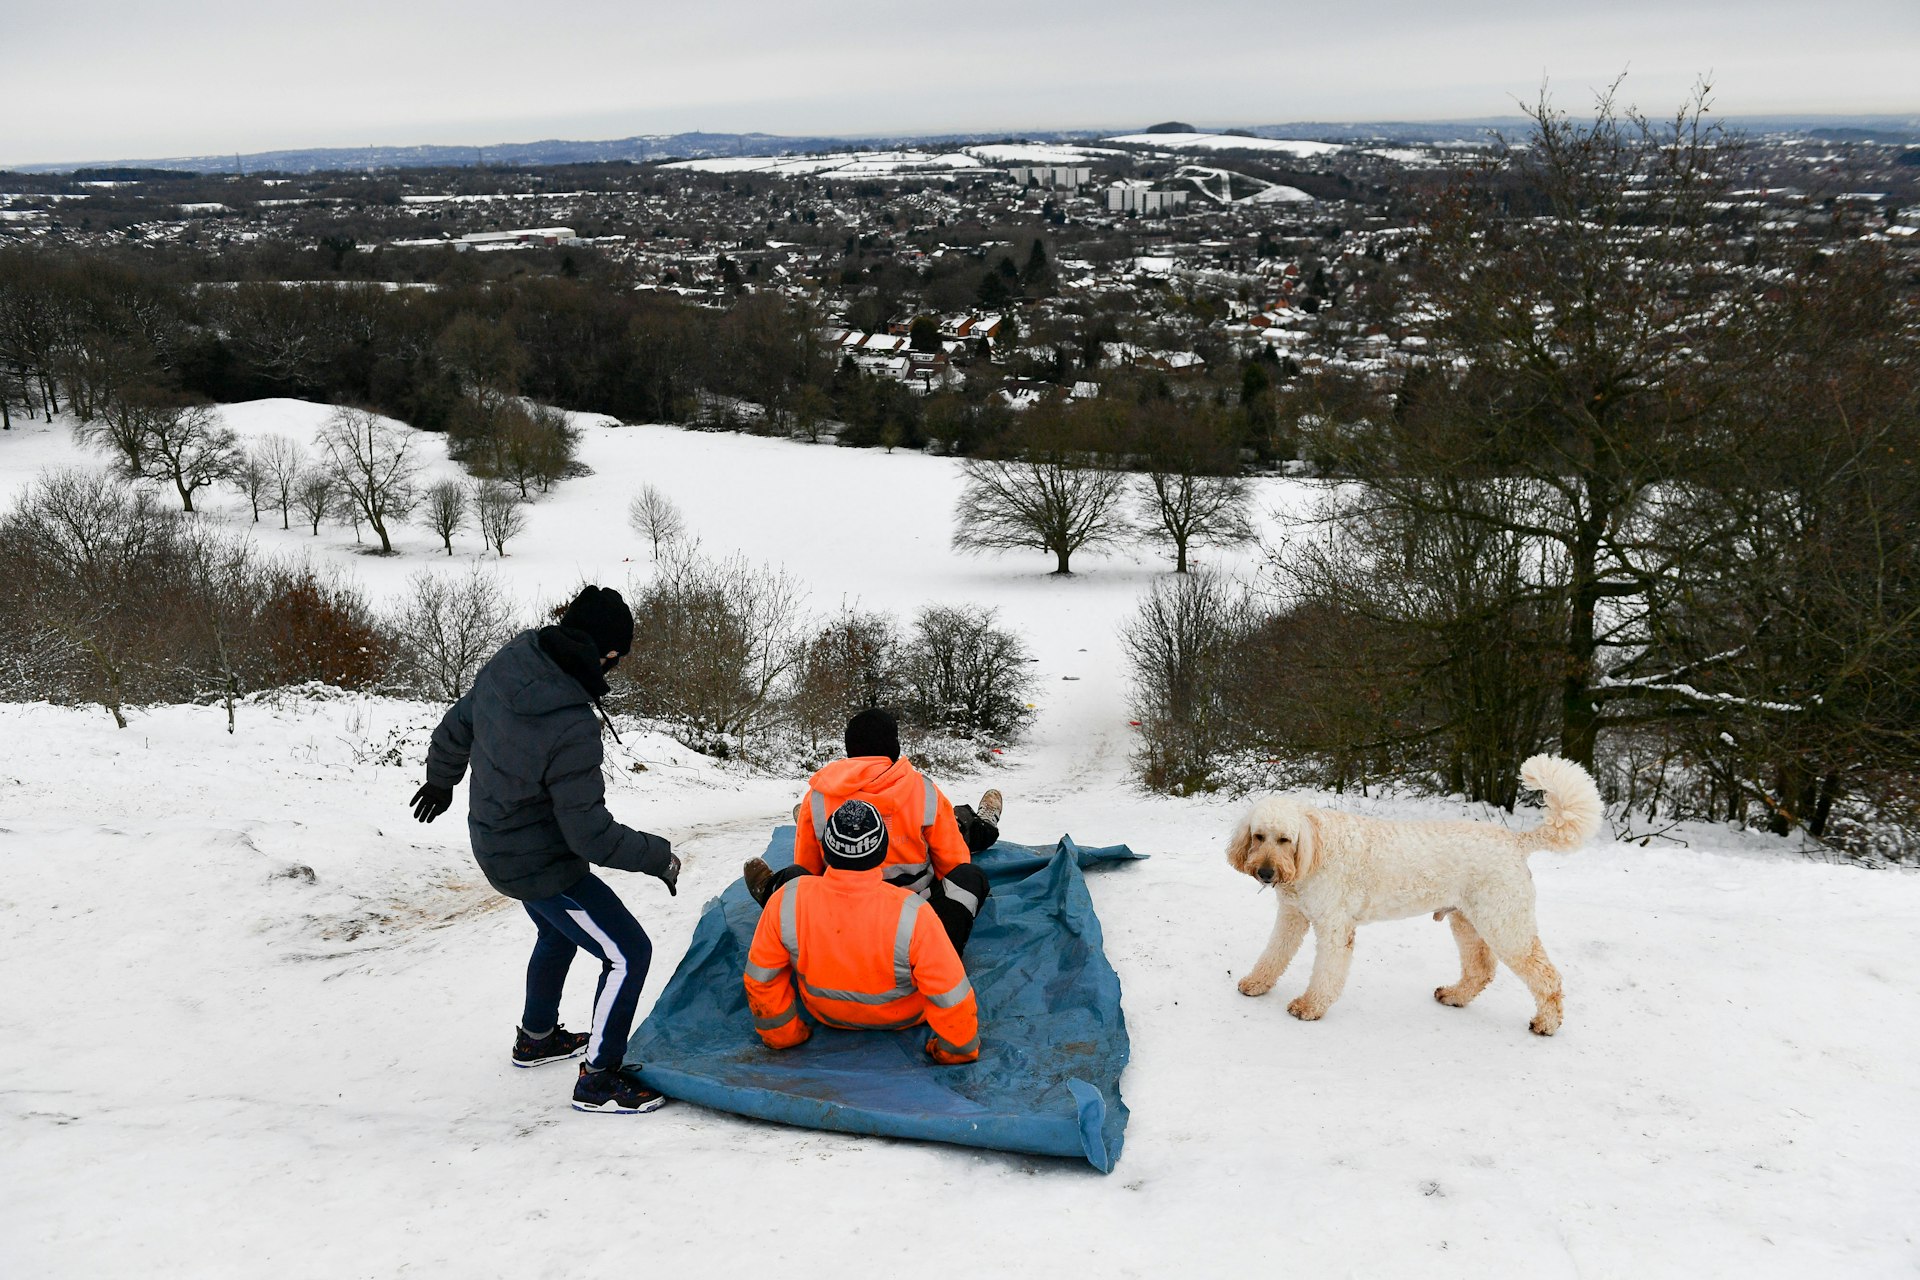 A group of friends use a sheet to sledge in the snow-covered Lickey Hills Country Park, Birmingham